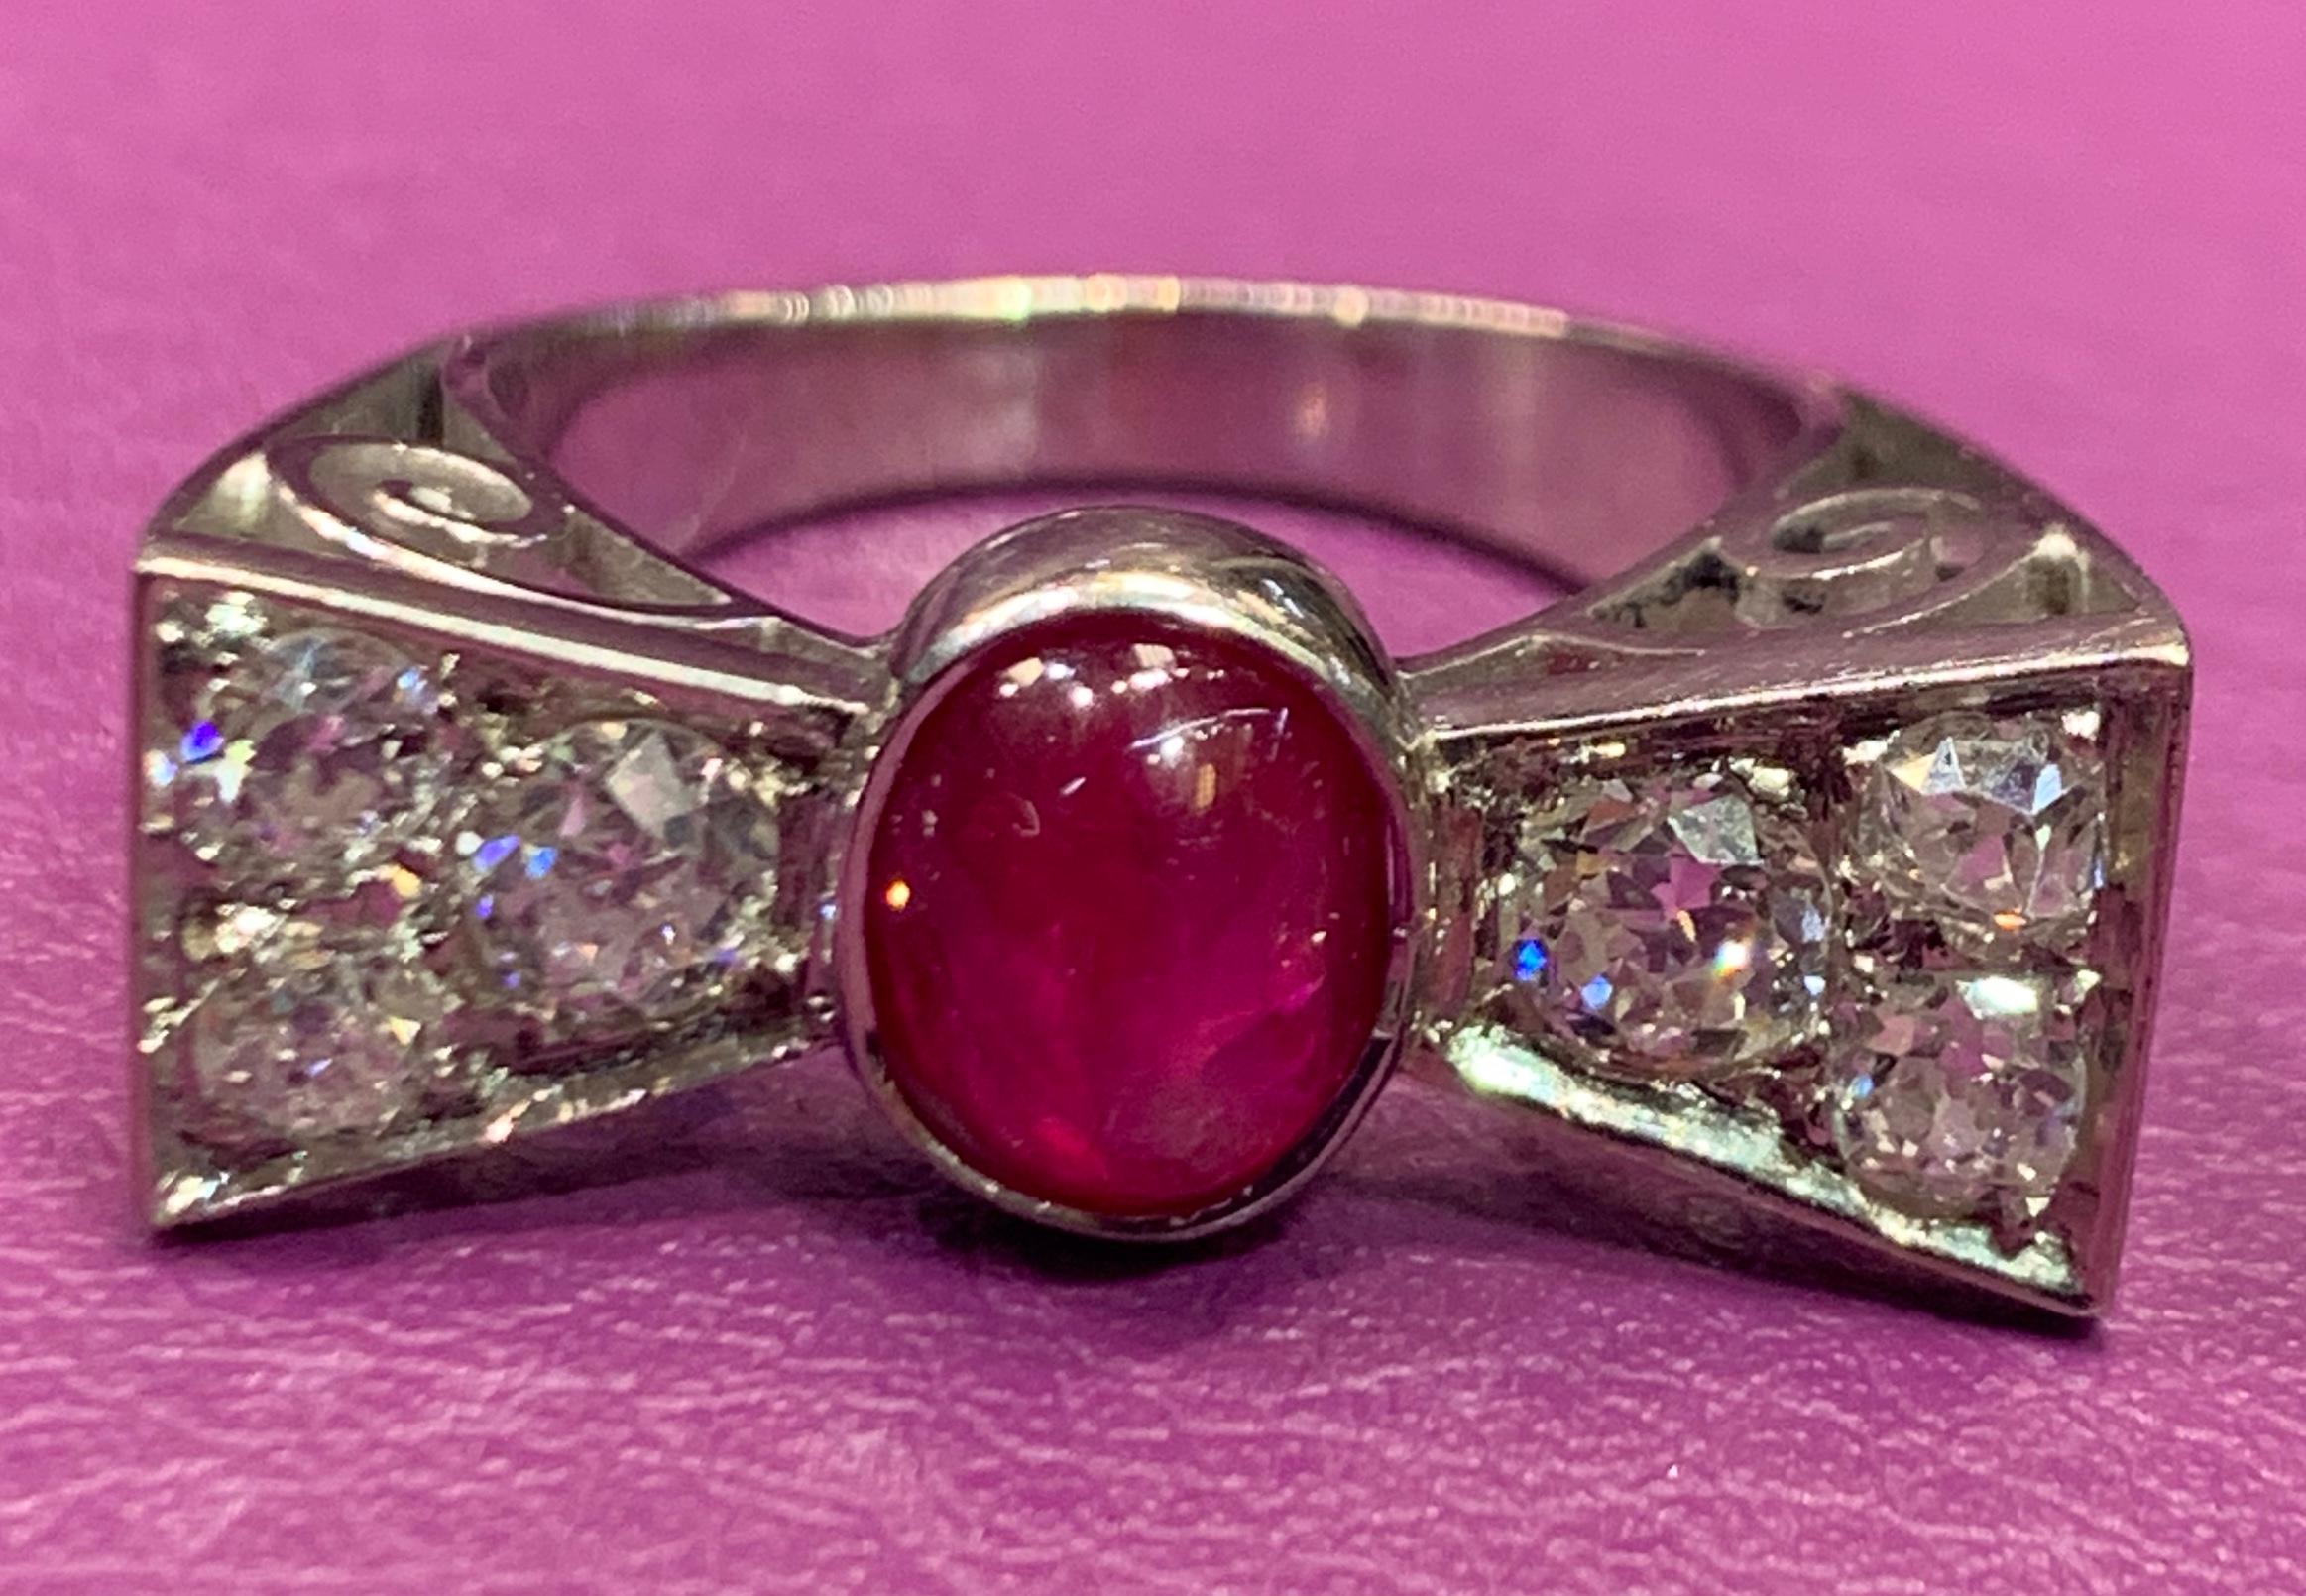 Cabochon Ruby & Diamond Bow Tie Ring 
Ruby Weight: Approximately 2.25 Cts
Diamond Weight: .85 Cts
Ring Size: 6.5
Re-sizable free of charge 

